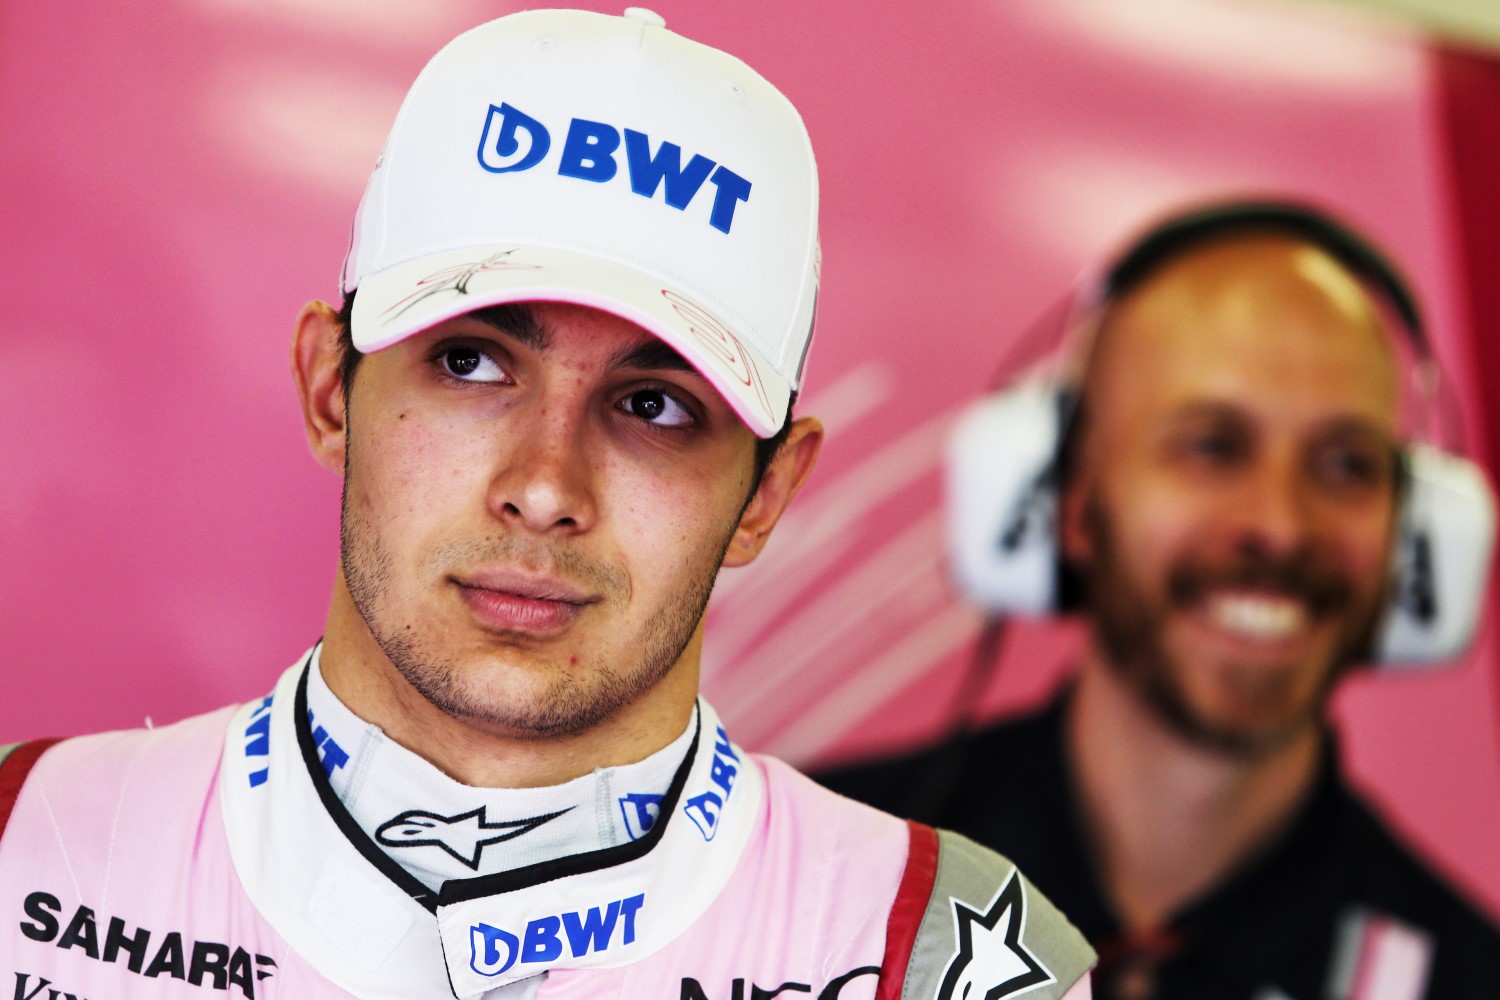 Ocon will sit out 2019